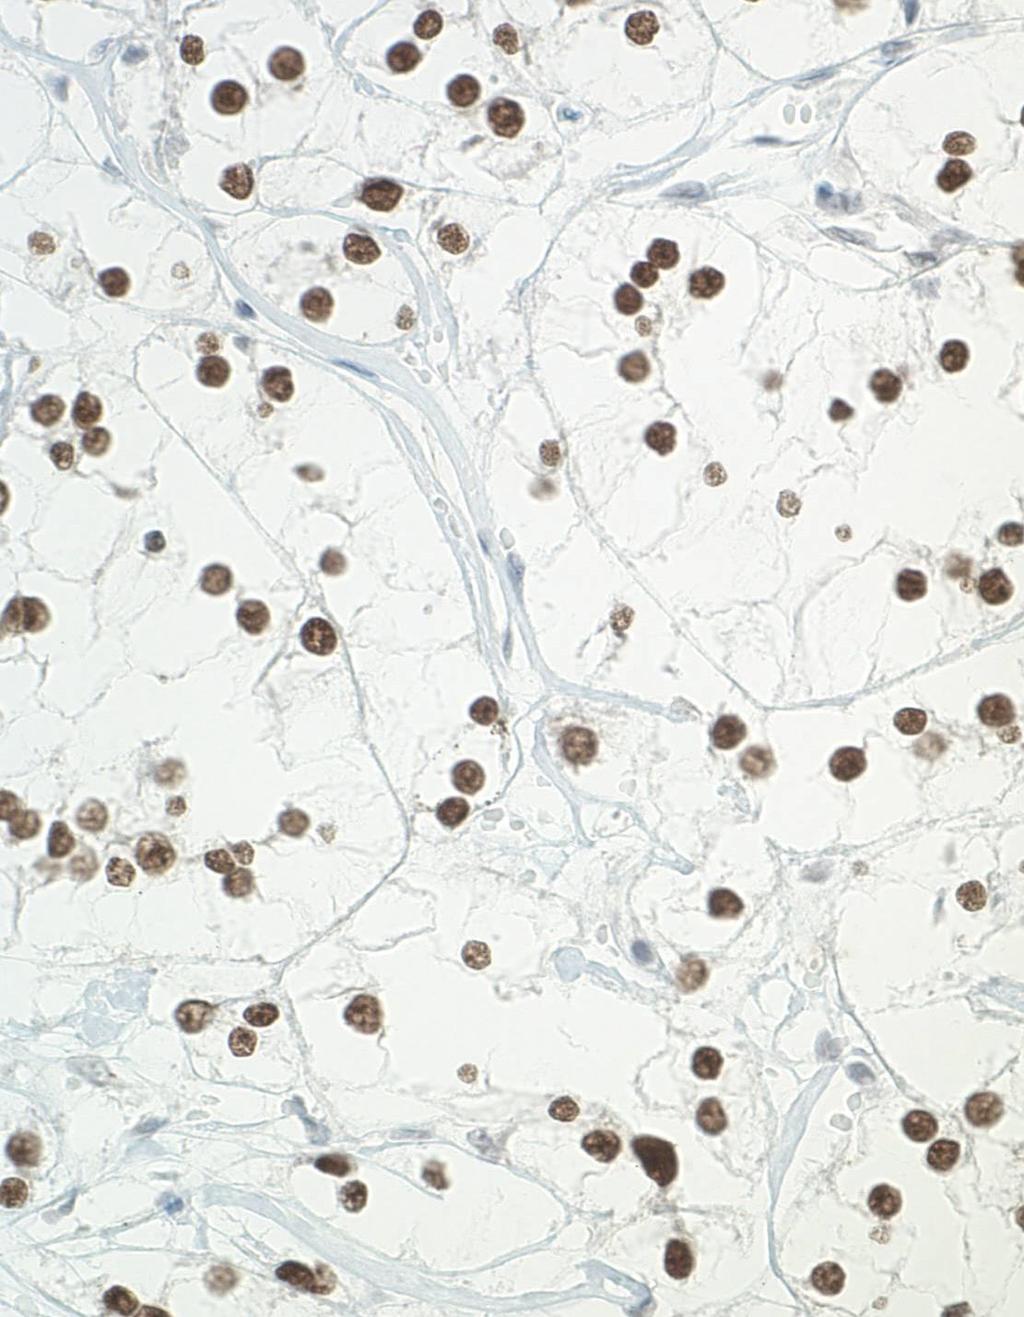 Xp11 translocation renal cell carcinoma IHC and cytogenetic profile: Vimentin, CD10, RCC + CK7 - Pan-CK, AE1/3, CAM5.